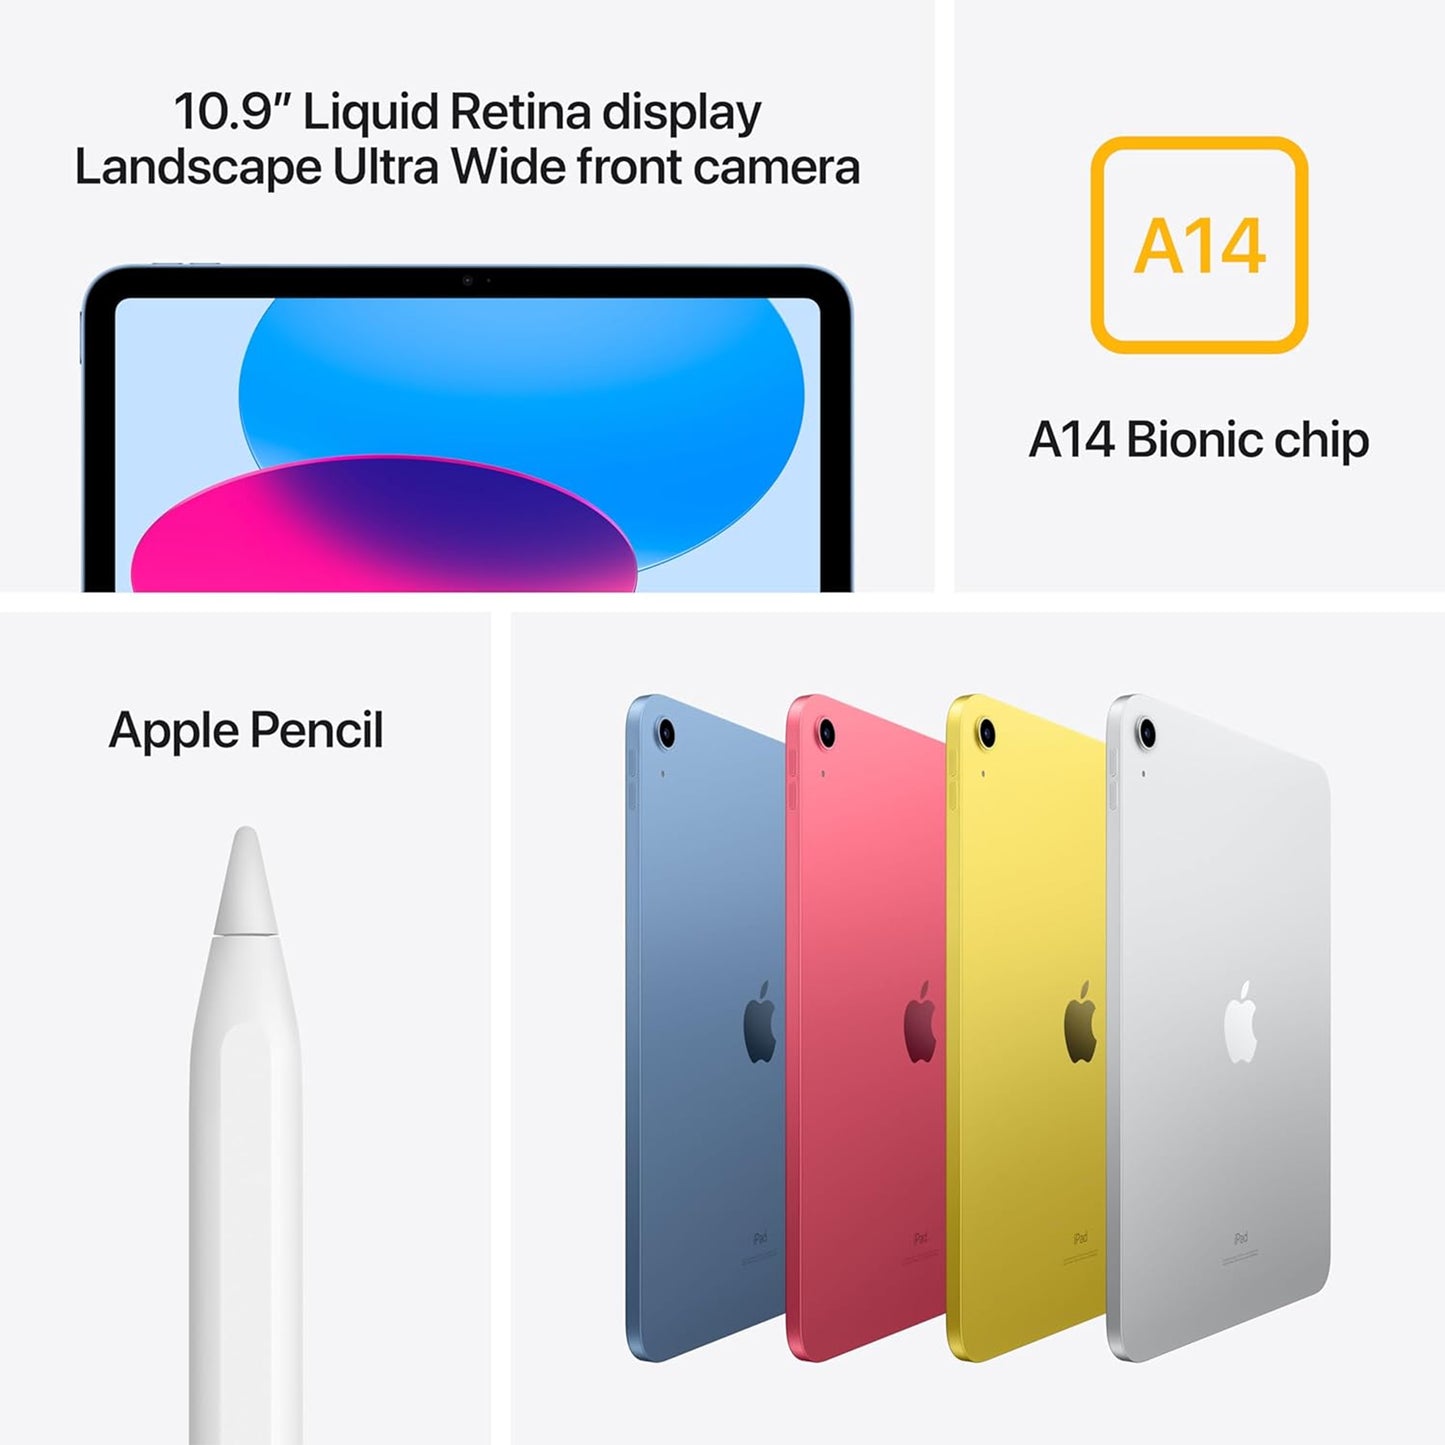 Apple iPad (10th Generation): with A14 Bionic chip, 10.9-inch Liquid Retina Display, 256GB, Wi-Fi 6 + 5G Cellular, 12MP front/12MP Back Camera, Touch ID, All-Day Battery Life – Yellow